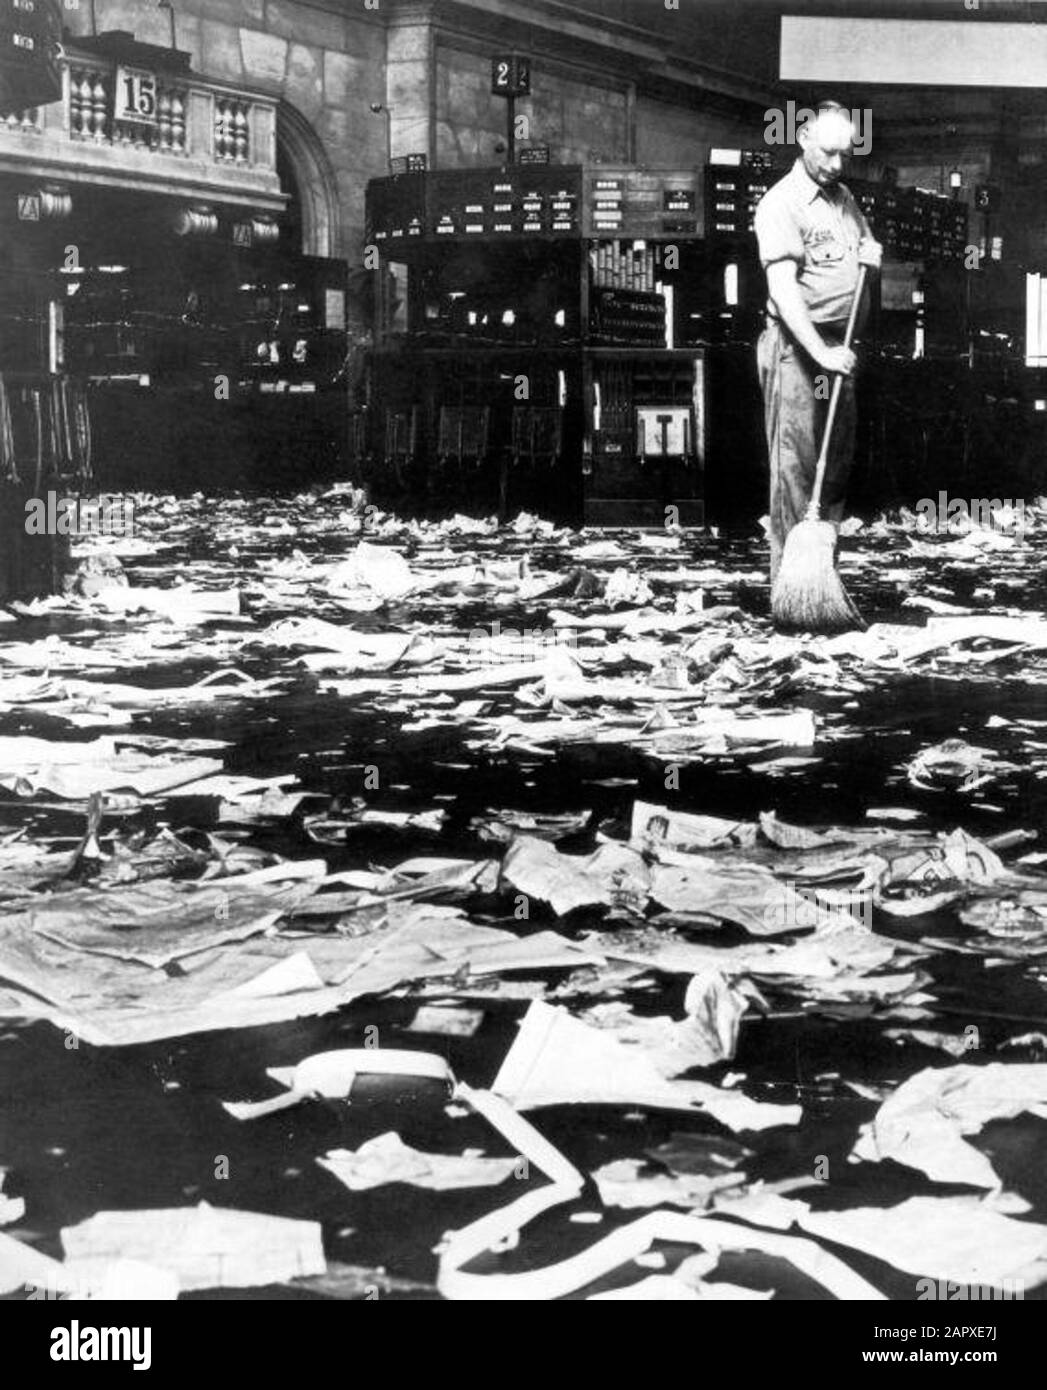 Savings City Photo, SFA001018144 The New York Stock Exchange in Wall Street after the crash, 1929: cleaner wipes the floor with a broom, filled with crumpled and torn newspapers and other paper. Stock Photo